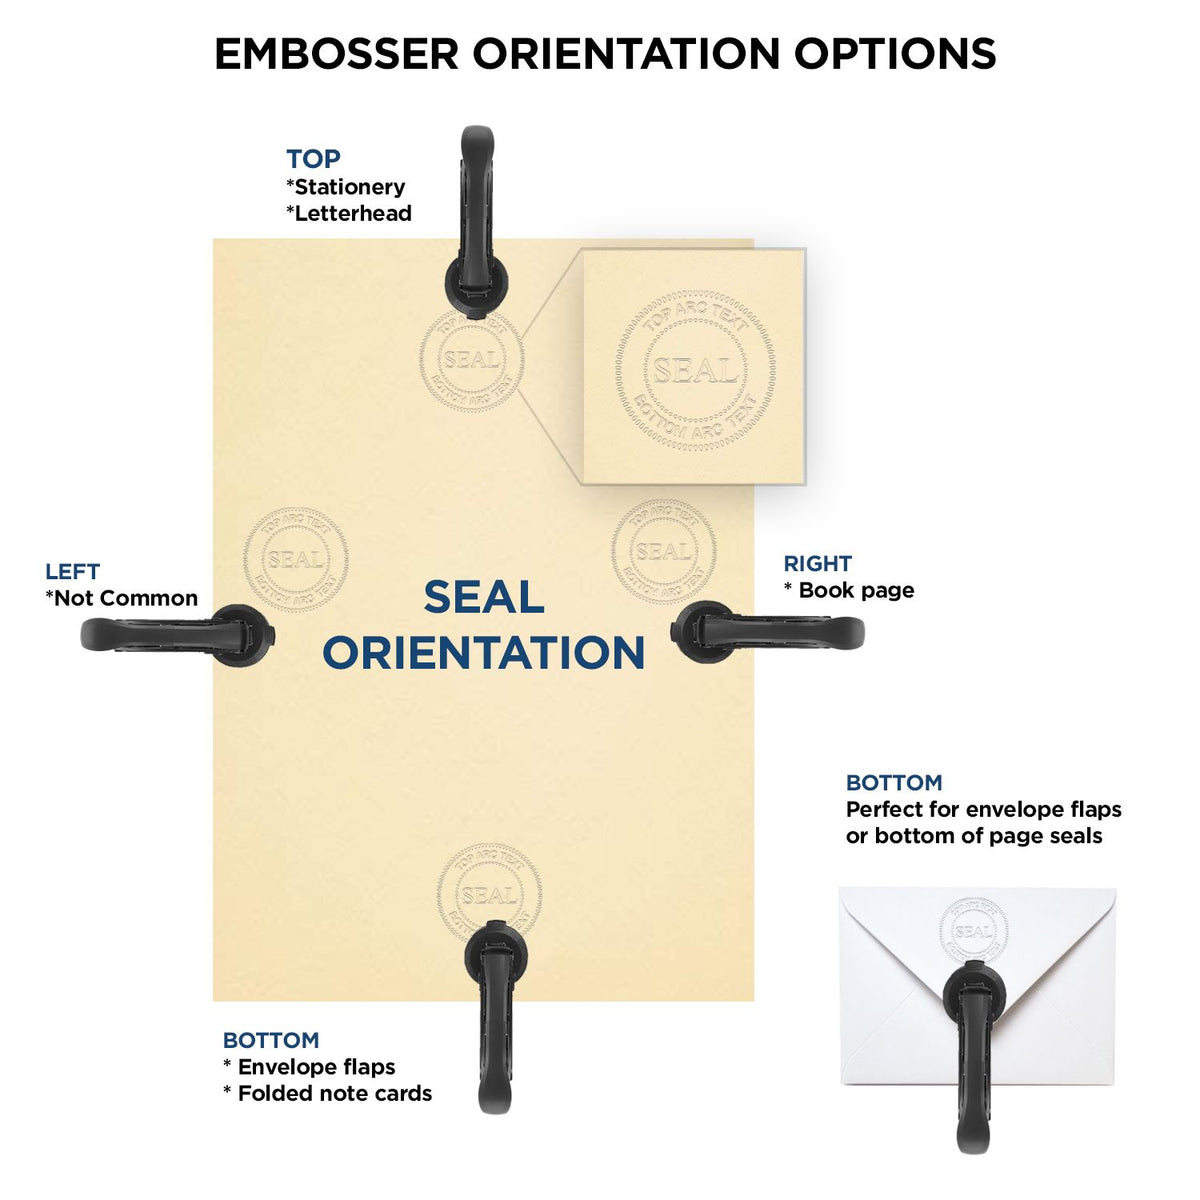 An infographic for the Ohio Geologist Desk Seal showing embosser orientation, this is showing examples of a top, bottom, right and left insert.